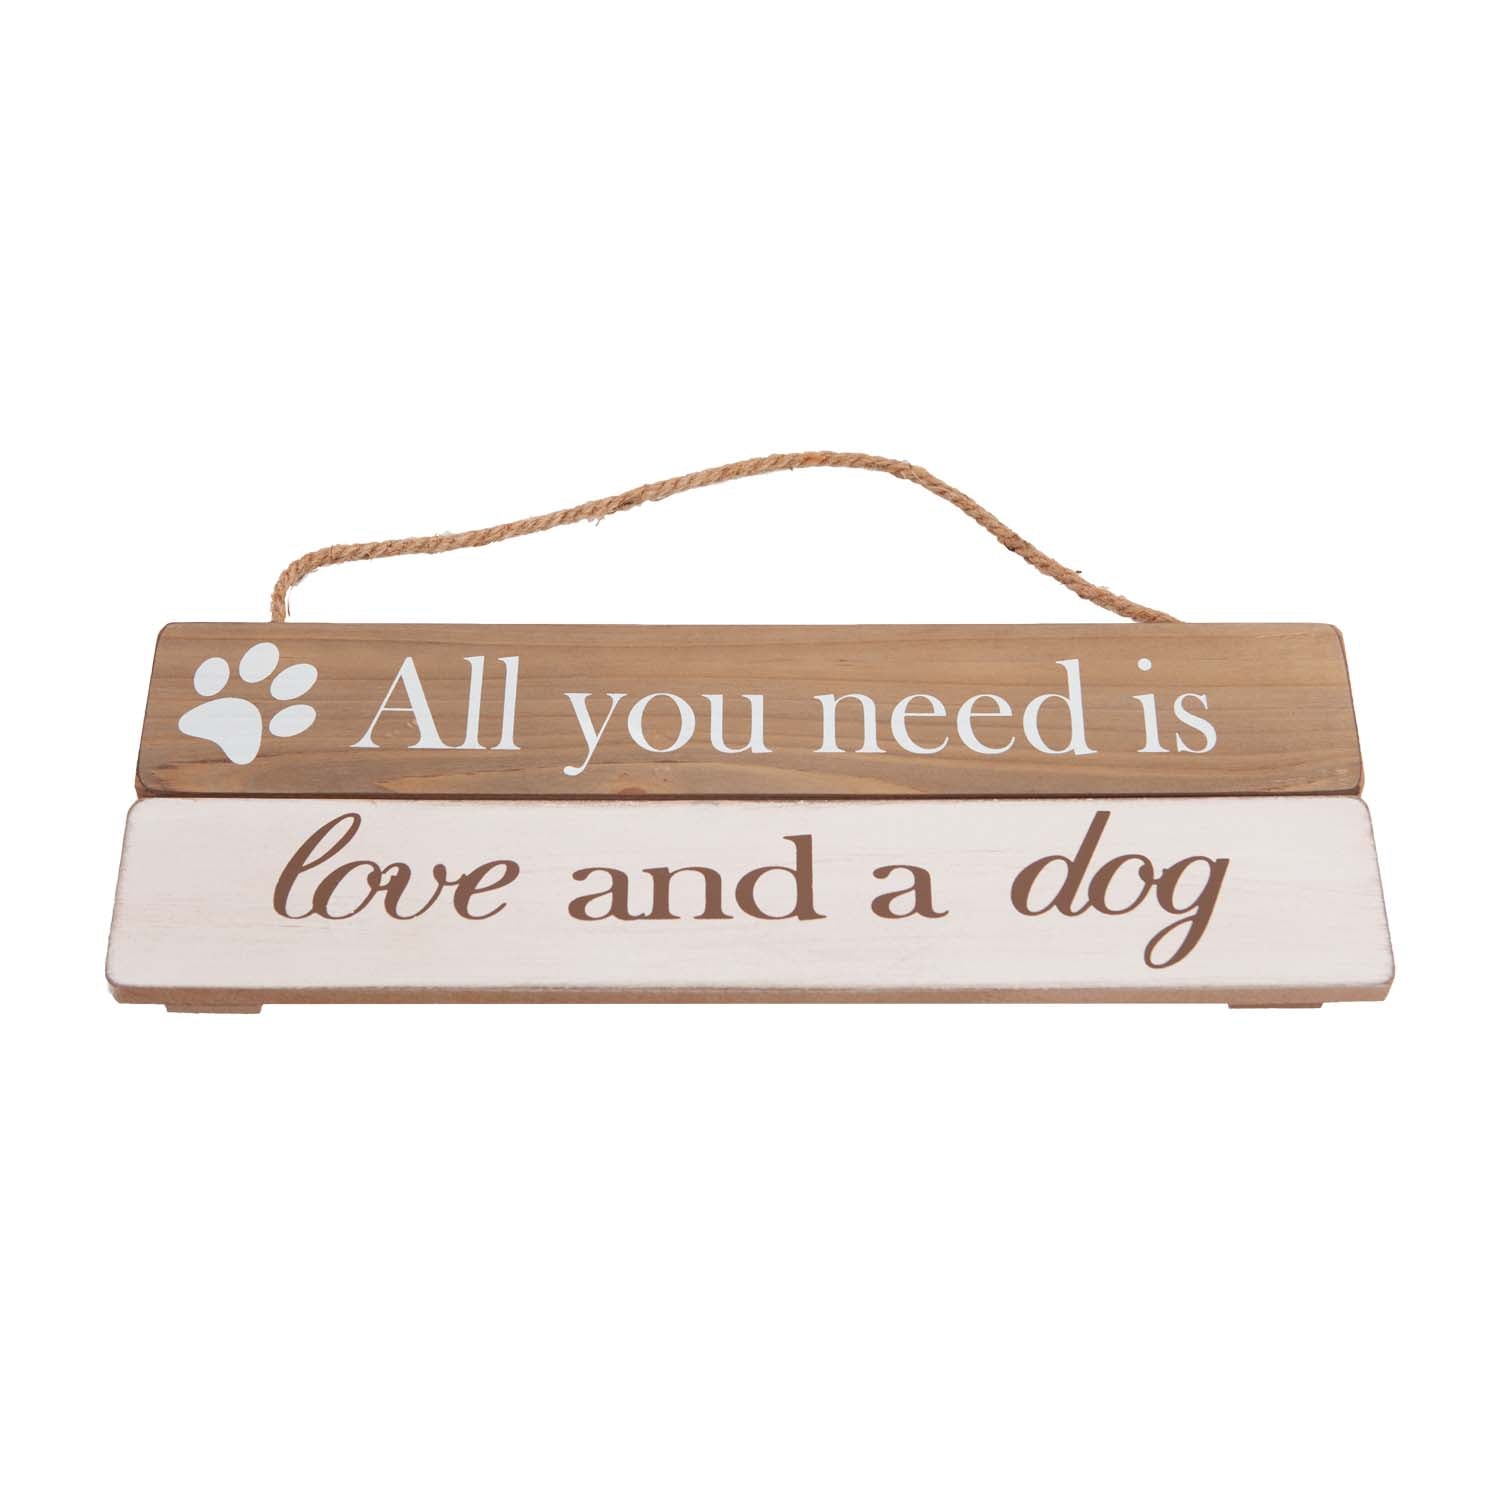 Dog Lover Gifts available at Dog Krazy Gifts – All You Need Is Love And A Dog Soft Wood Sign, Just Part Of Our Collection Of Signs Available At www.dogkrazygifts.co.uk